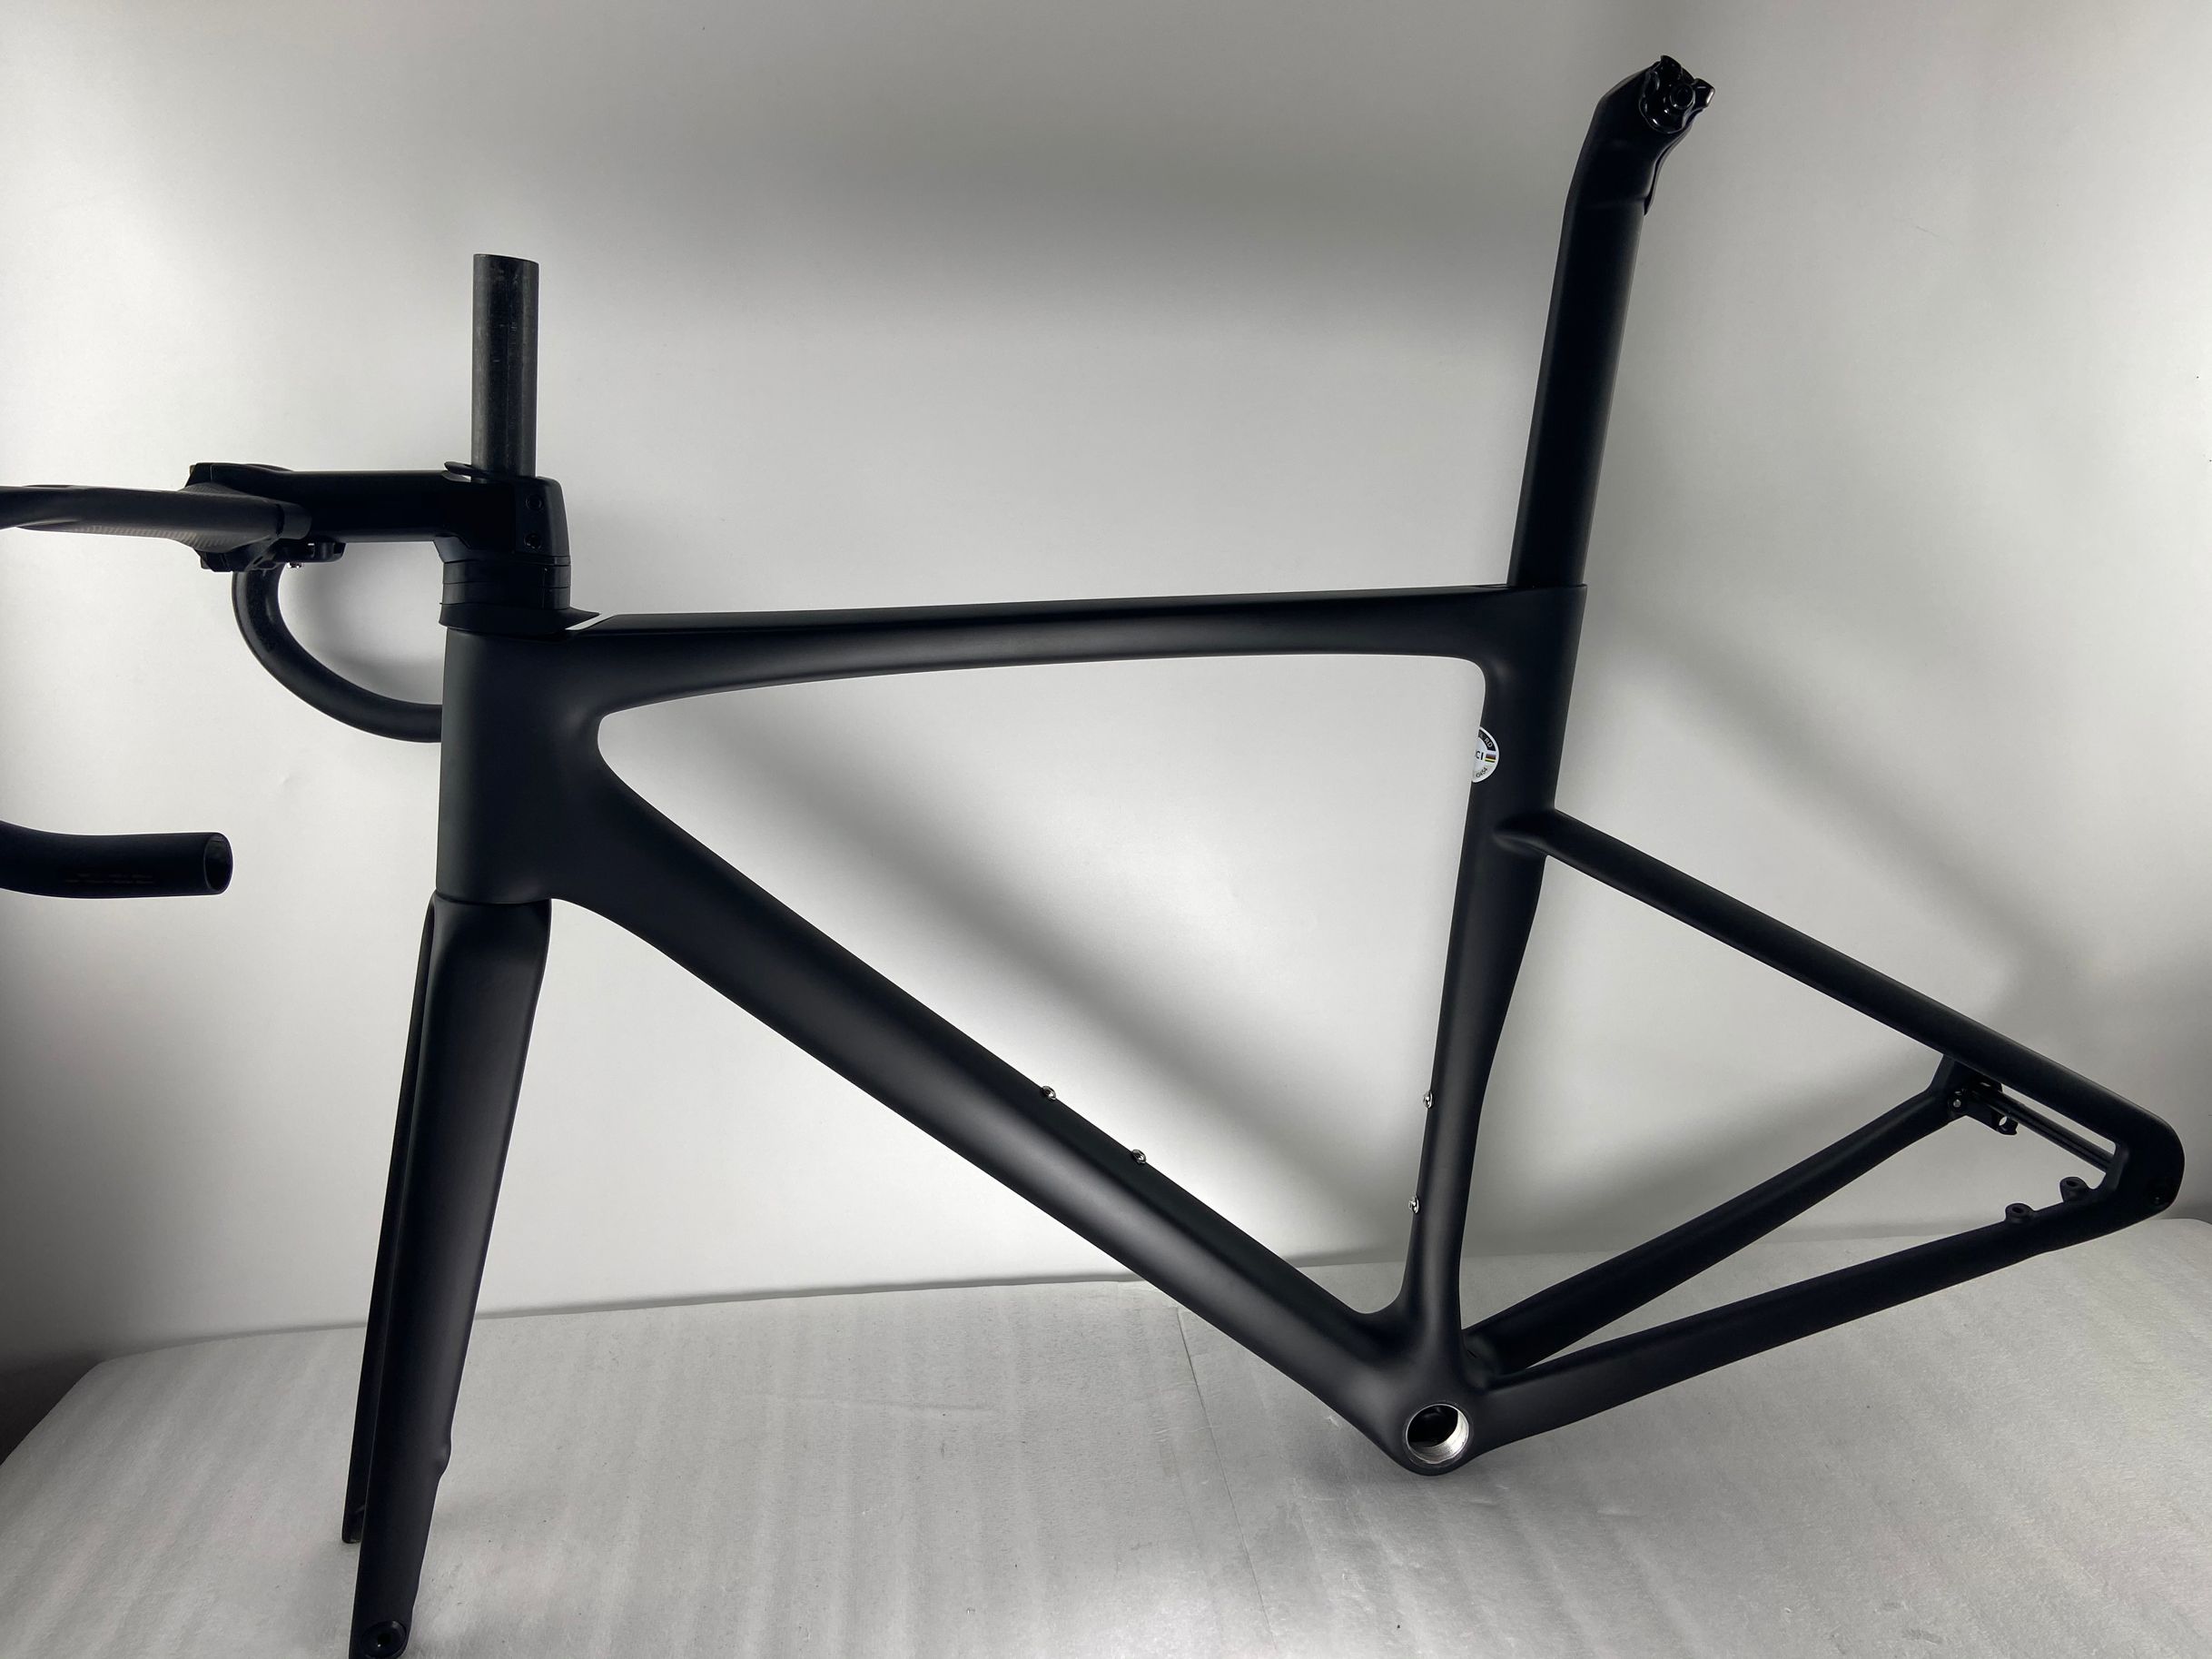 

2022 new road bike carbon frame all internal wiring disc brake 700C carbonfiber frameset compatible with Di2 and mechanical group, Customize